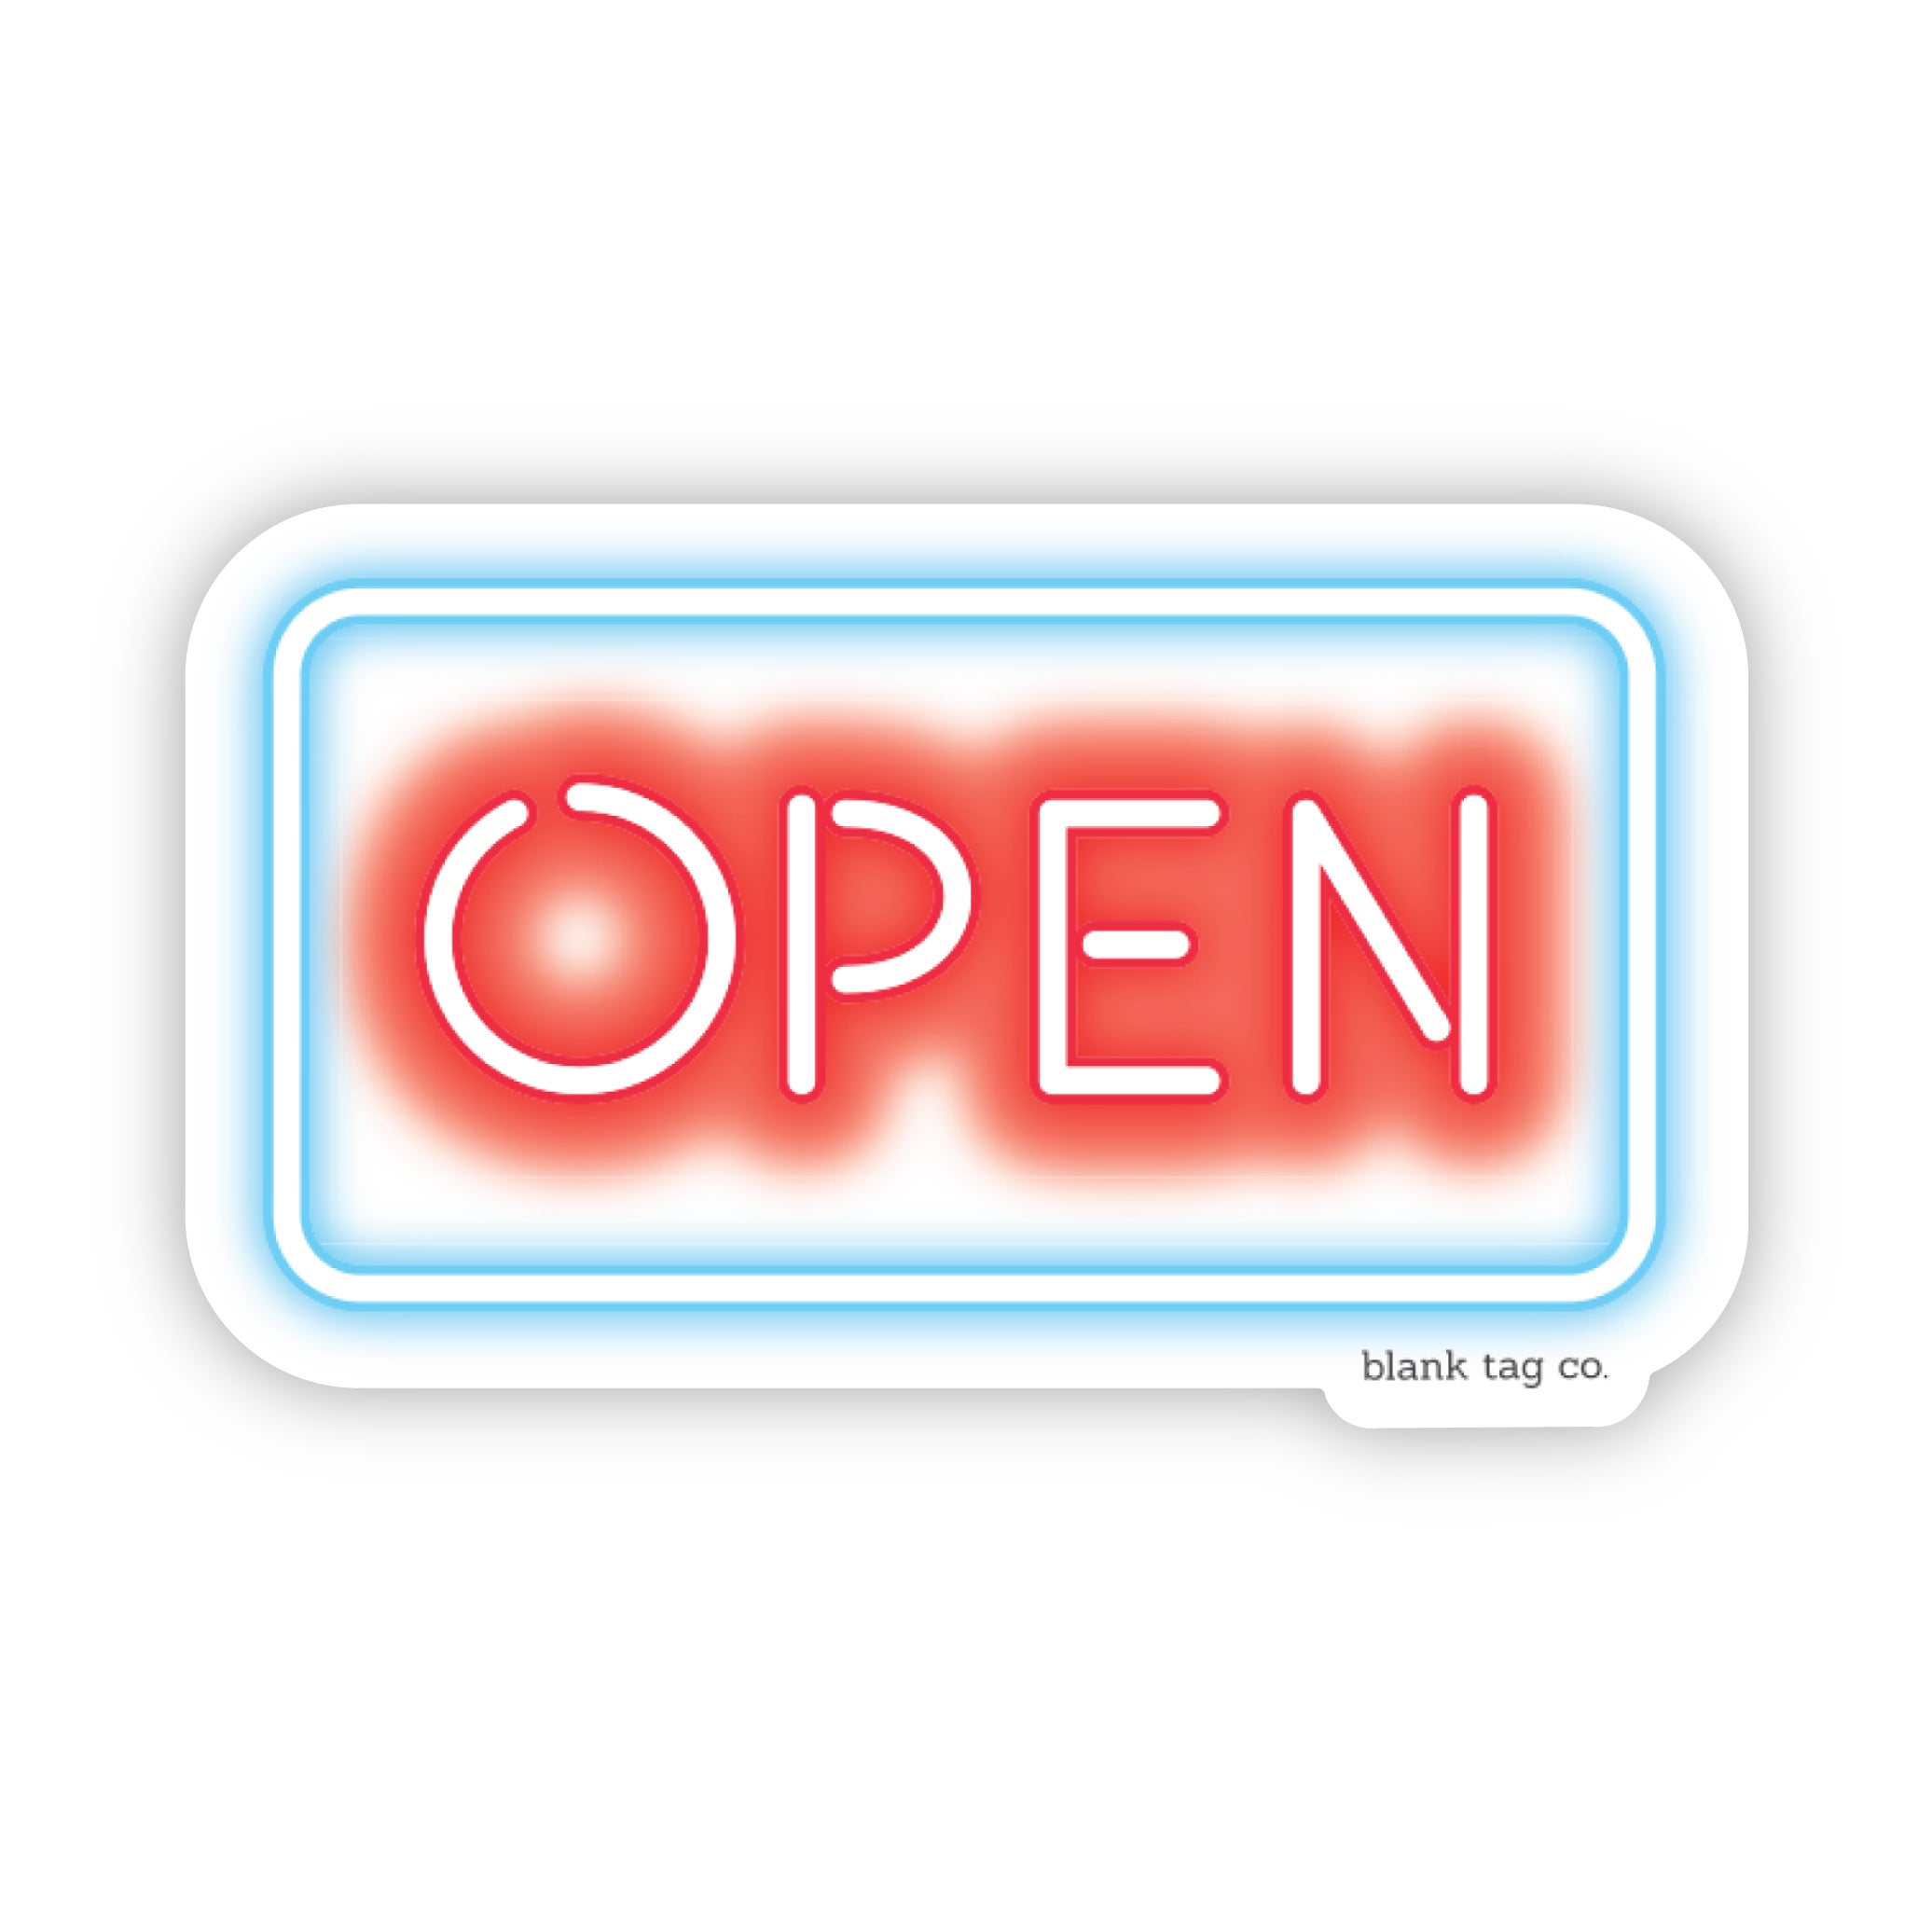 The Open Sign Sticker